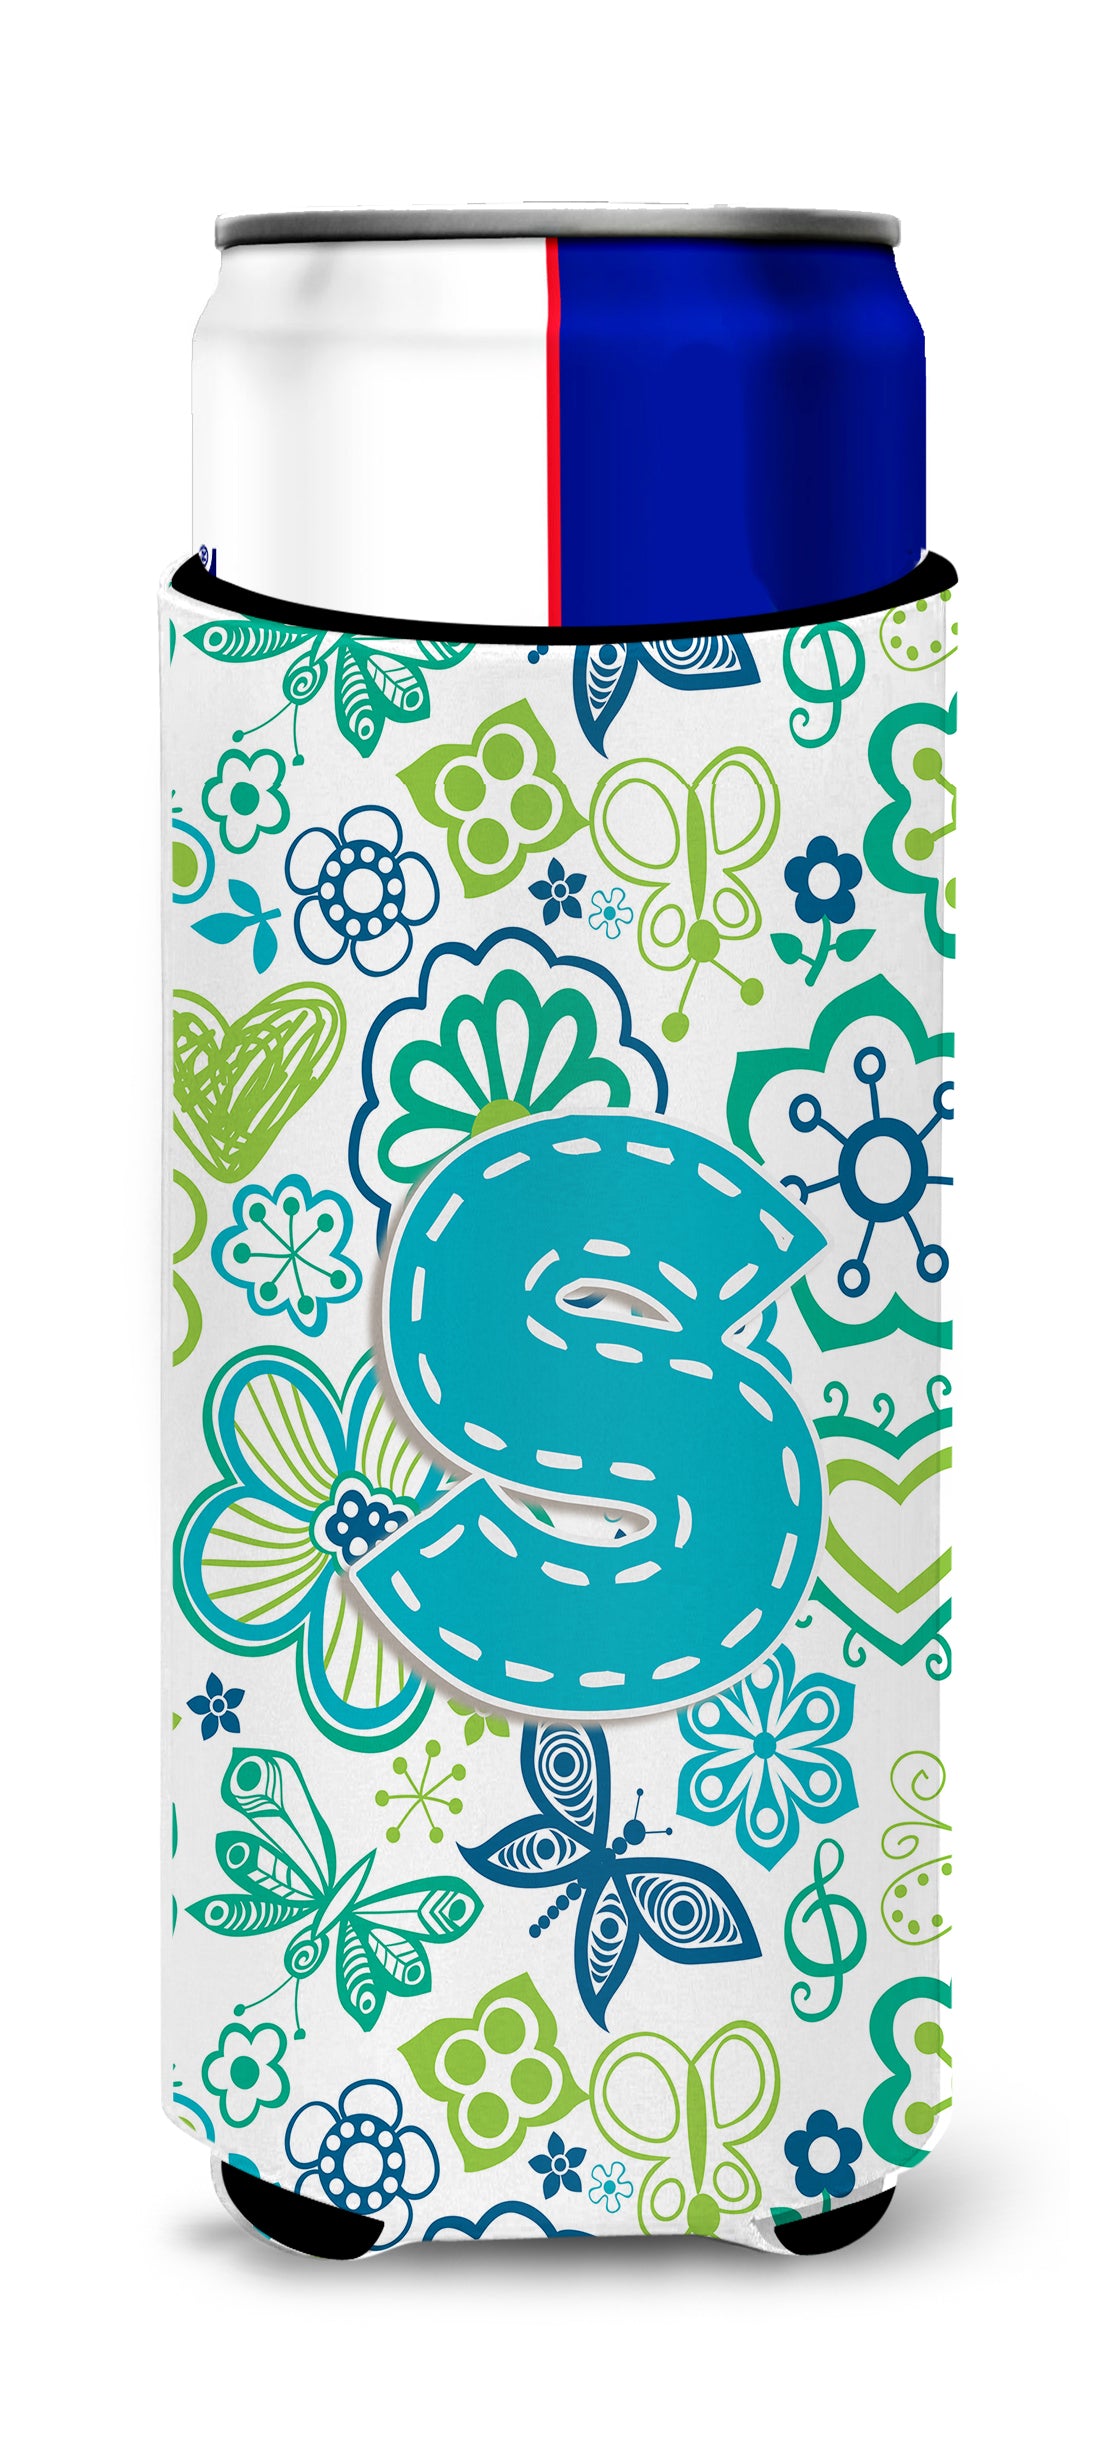 Letter S Flowers and Butterflies Teal Blue Ultra Beverage Insulators for slim cans CJ2006-SMUK.